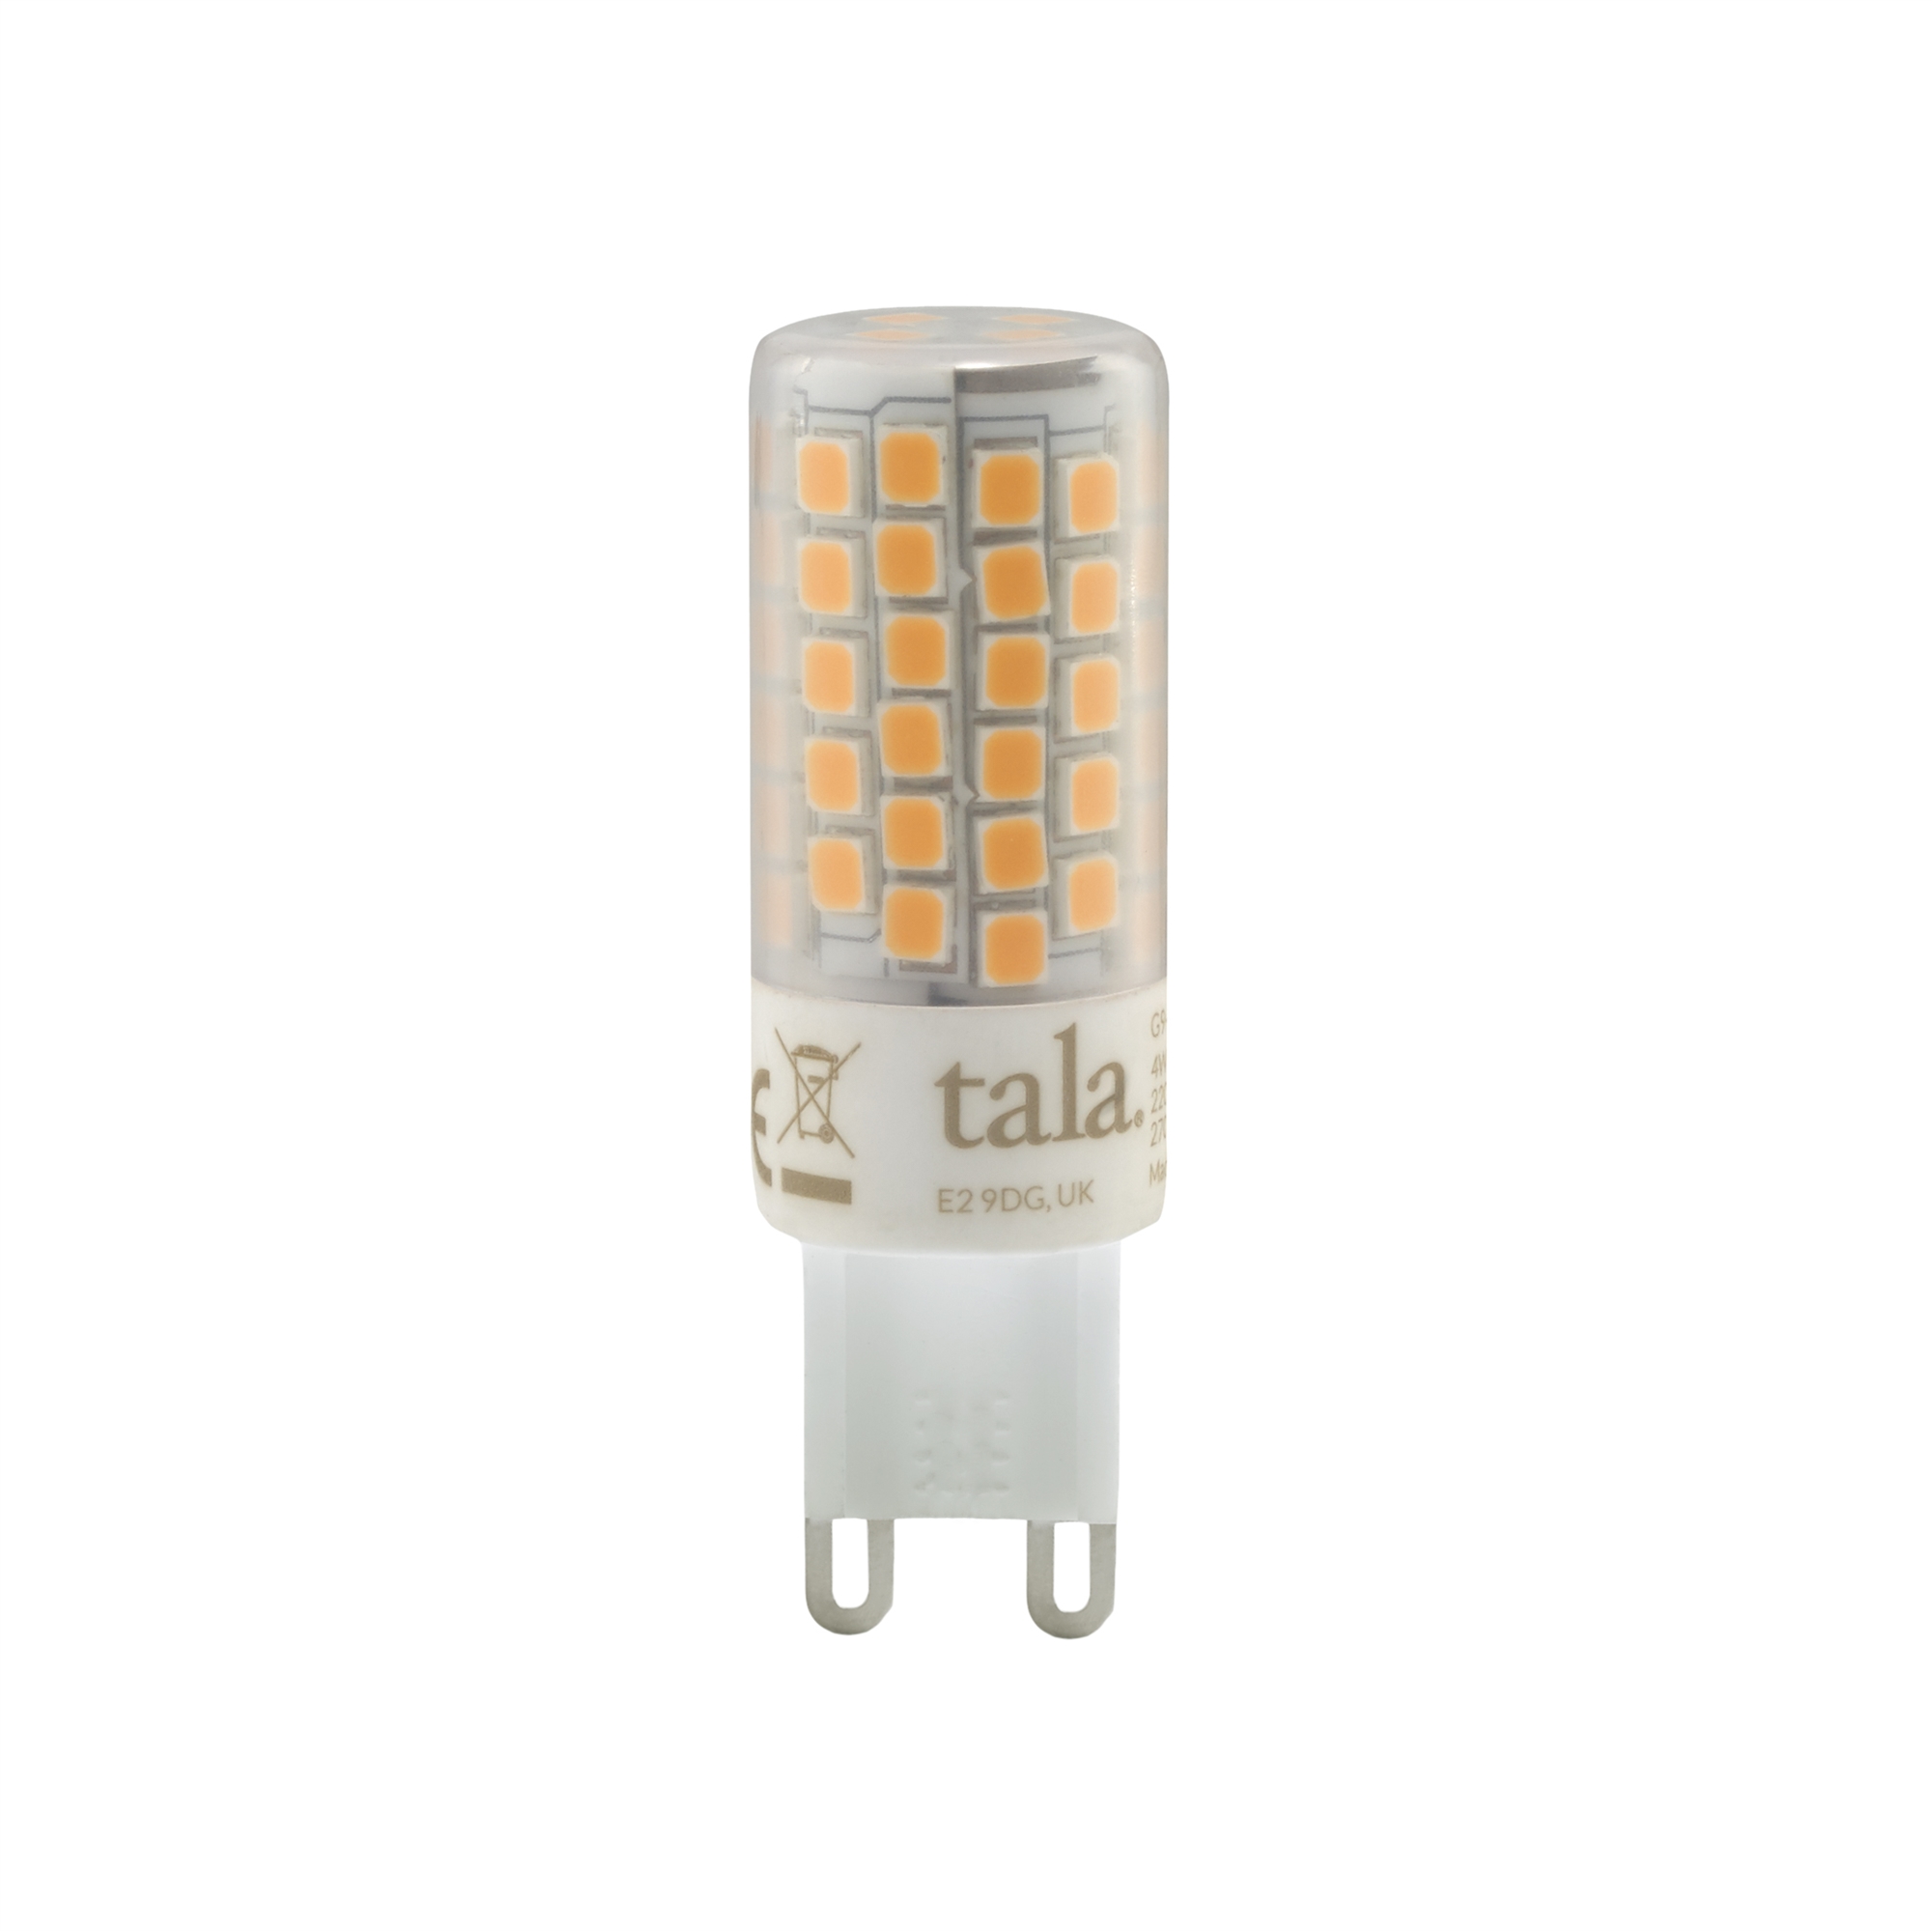 invoer long straal Tala G9 3.6W LED Lamp 2700K CRI 97 230V Dimmable Frosted Cover CE